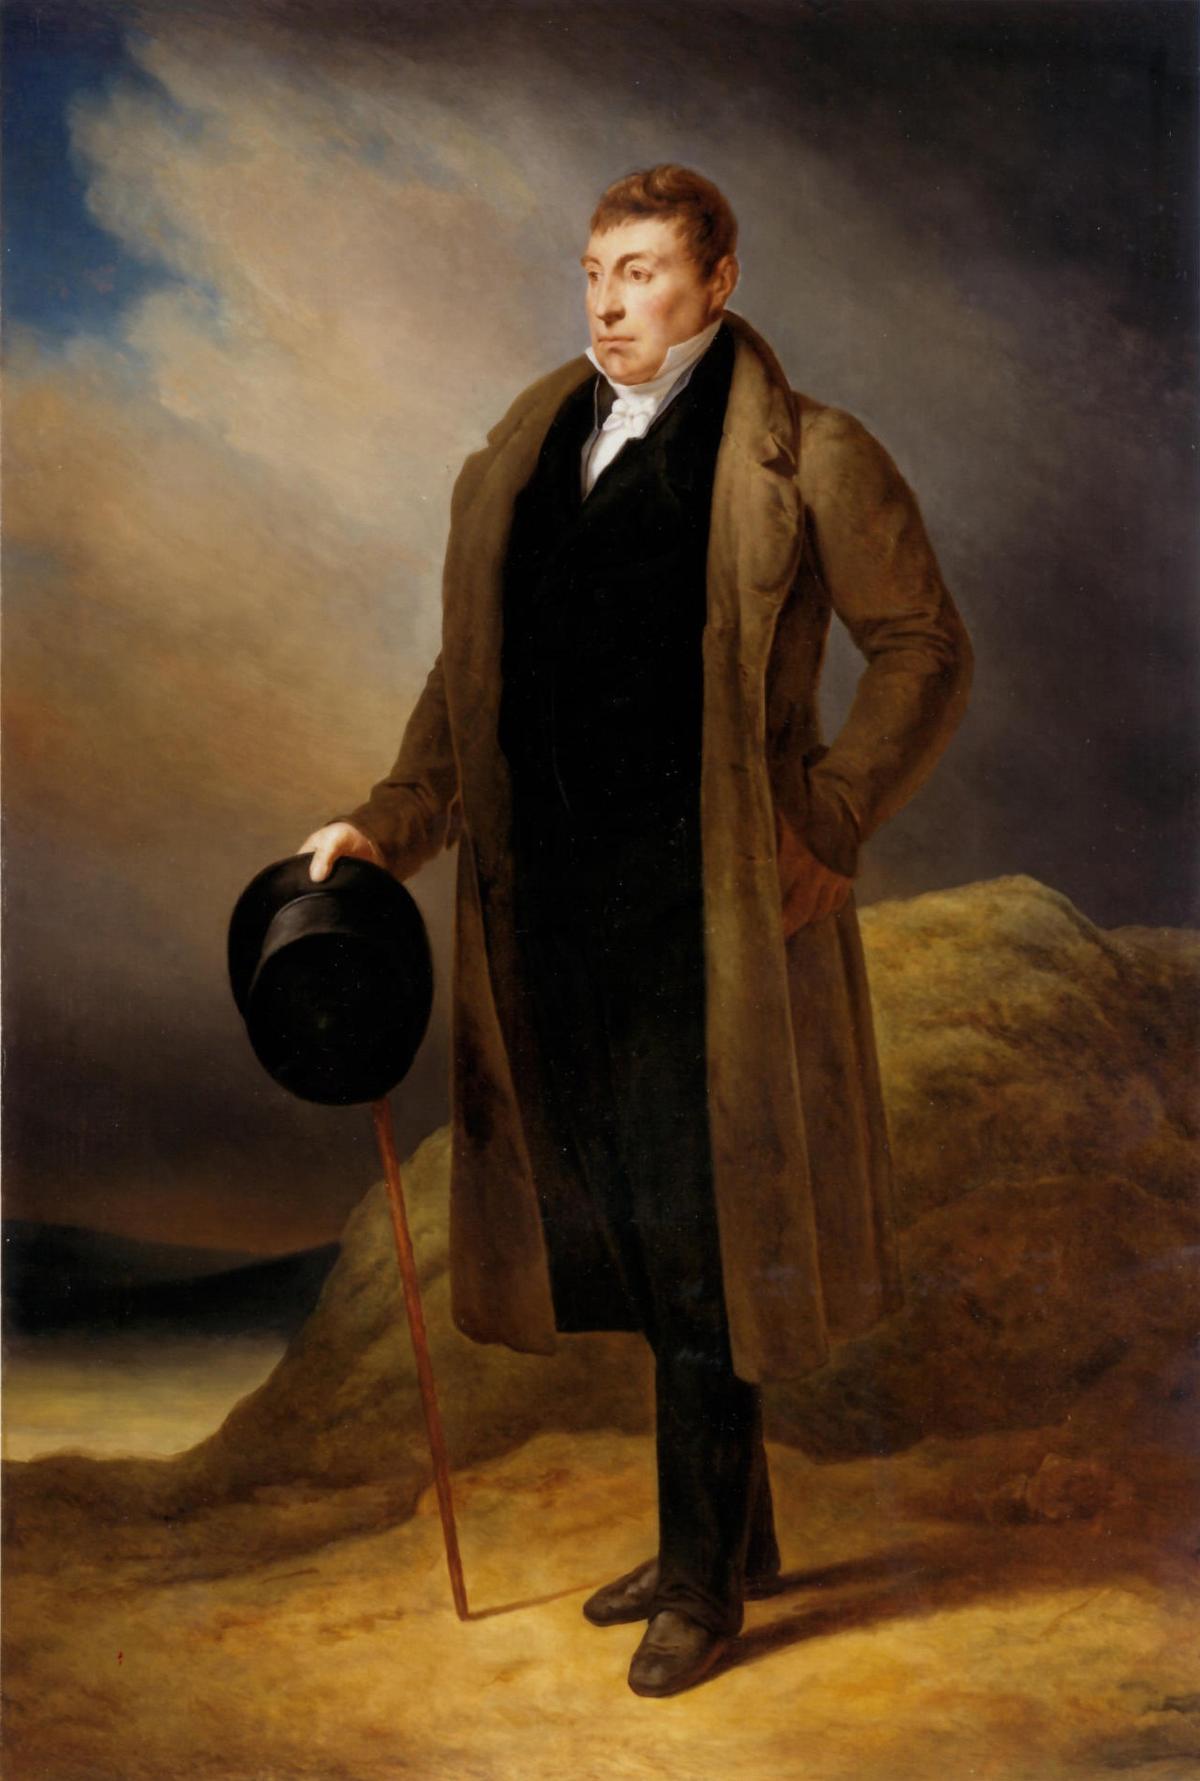 An 1823 portrait of Lafayette by Ary Scheffer. Collection of the U.S. House of Representatives. It was the most famous image of Lafayette during his U.S. tour in 1824. (Public domain)